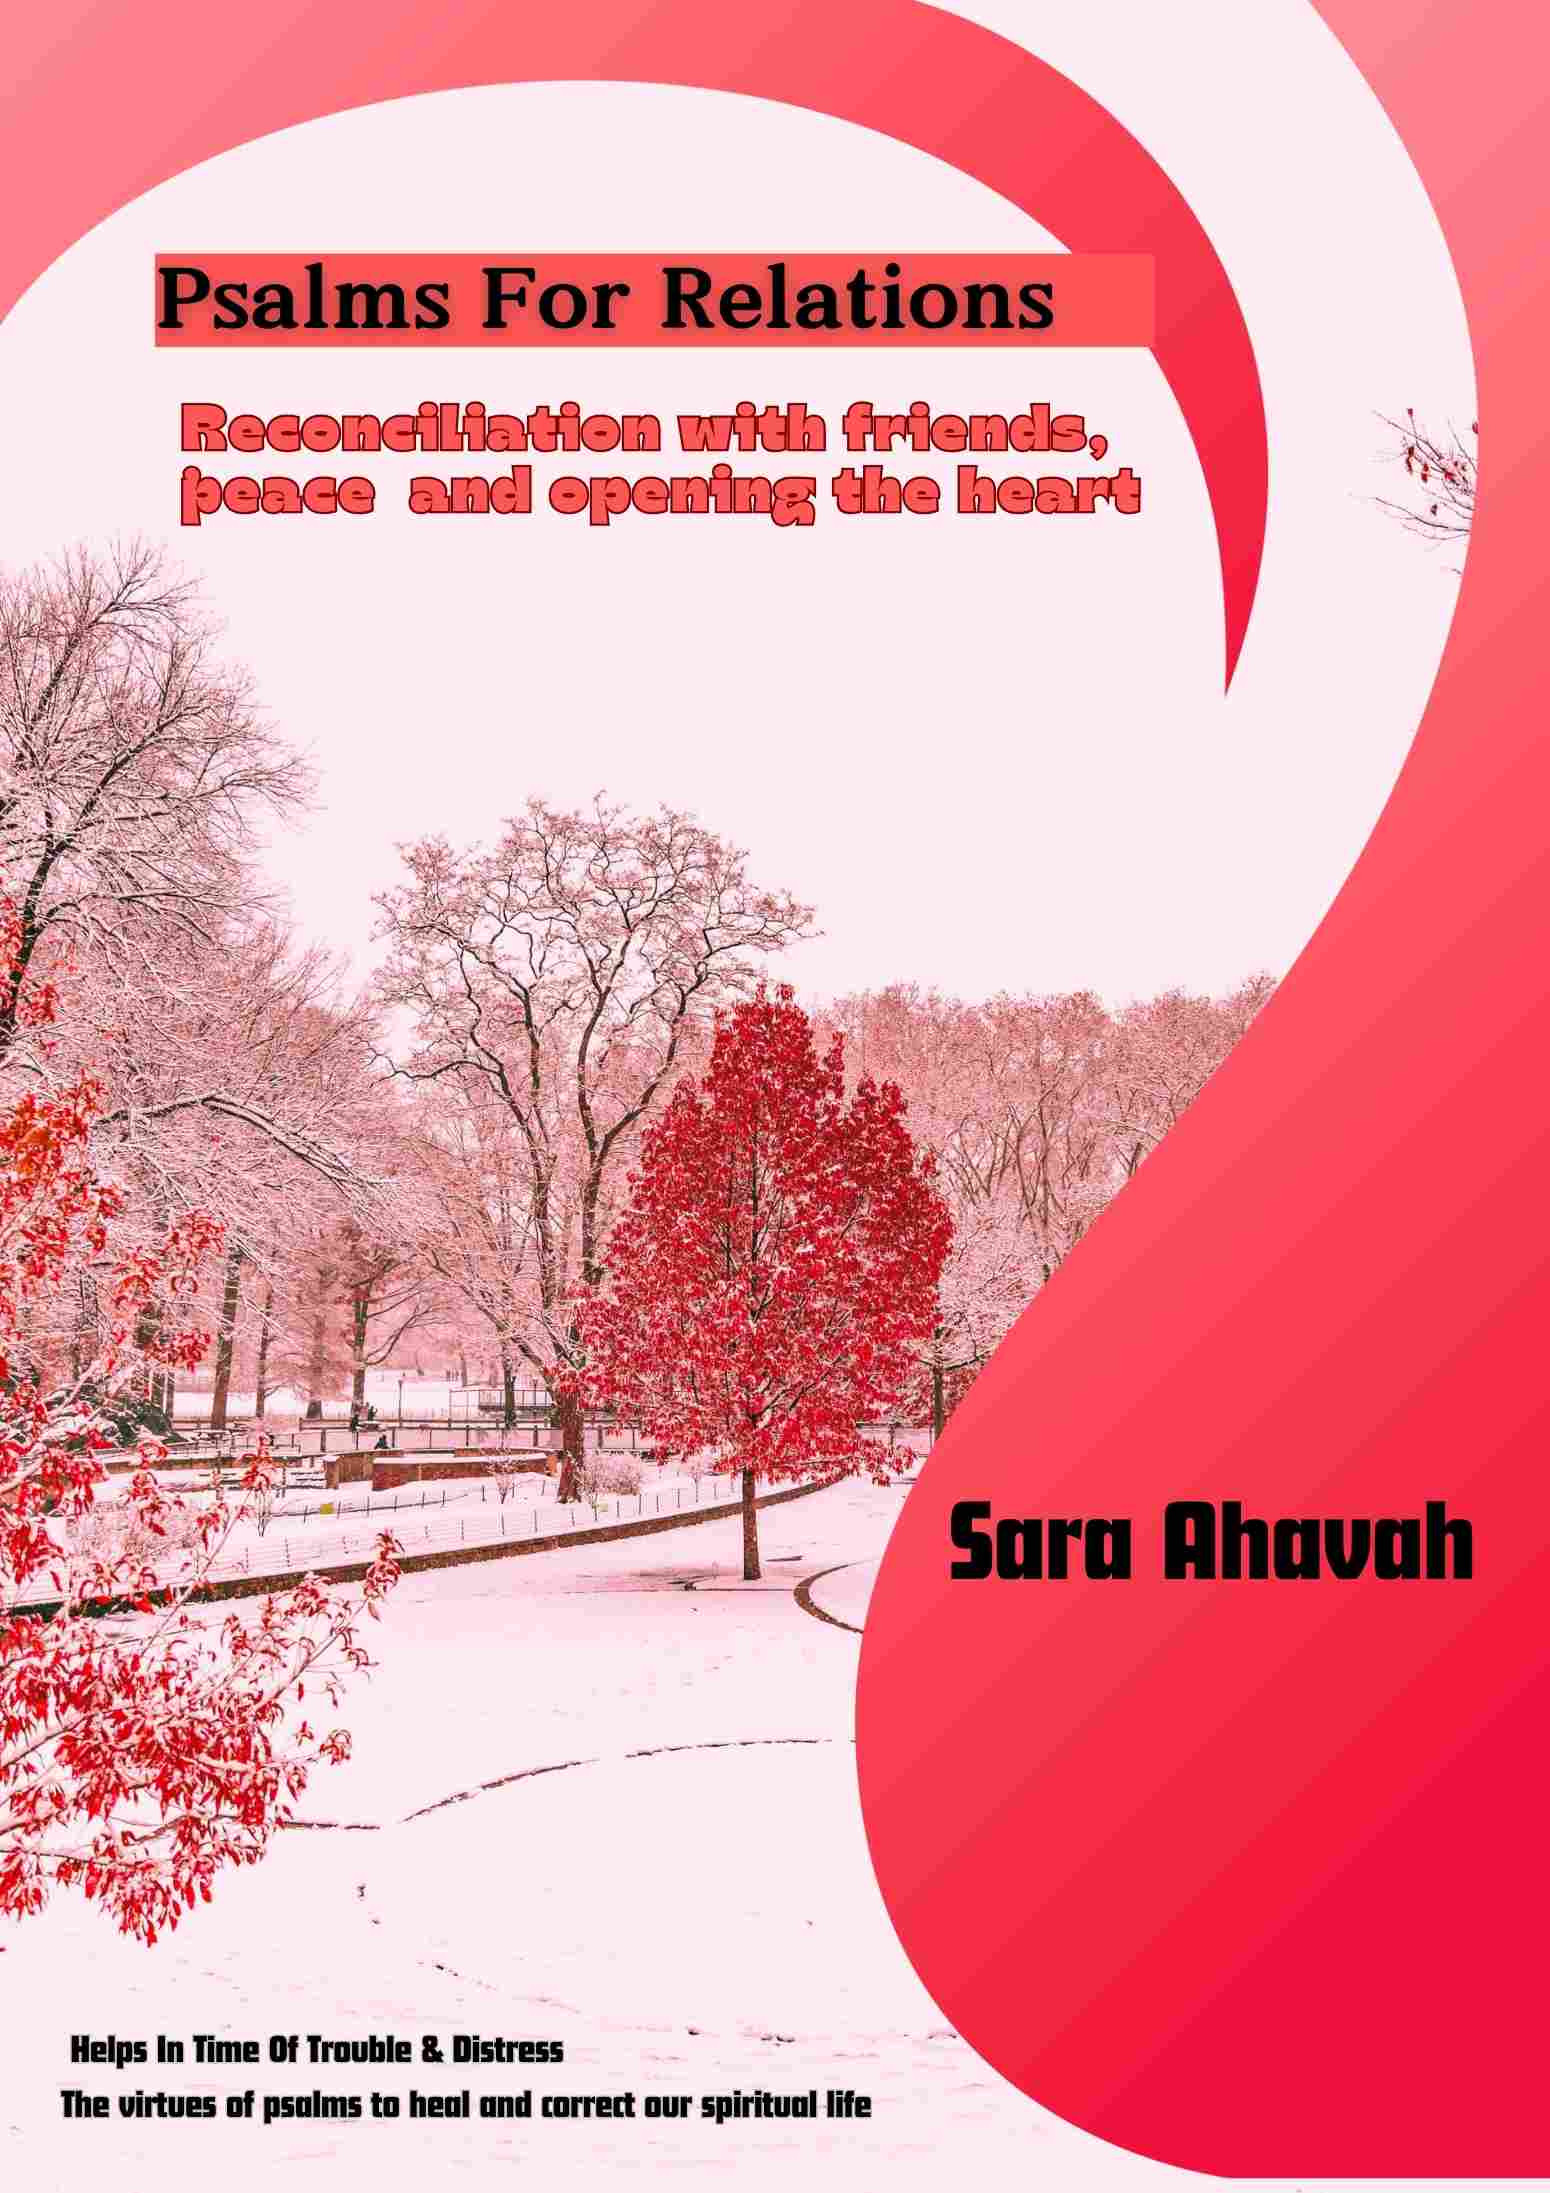 Sarainnerhealing Reconcilitiation-with-friends Psalms  For Healing - Reconciliation With Friends and Opening The Heart - Digital Download  